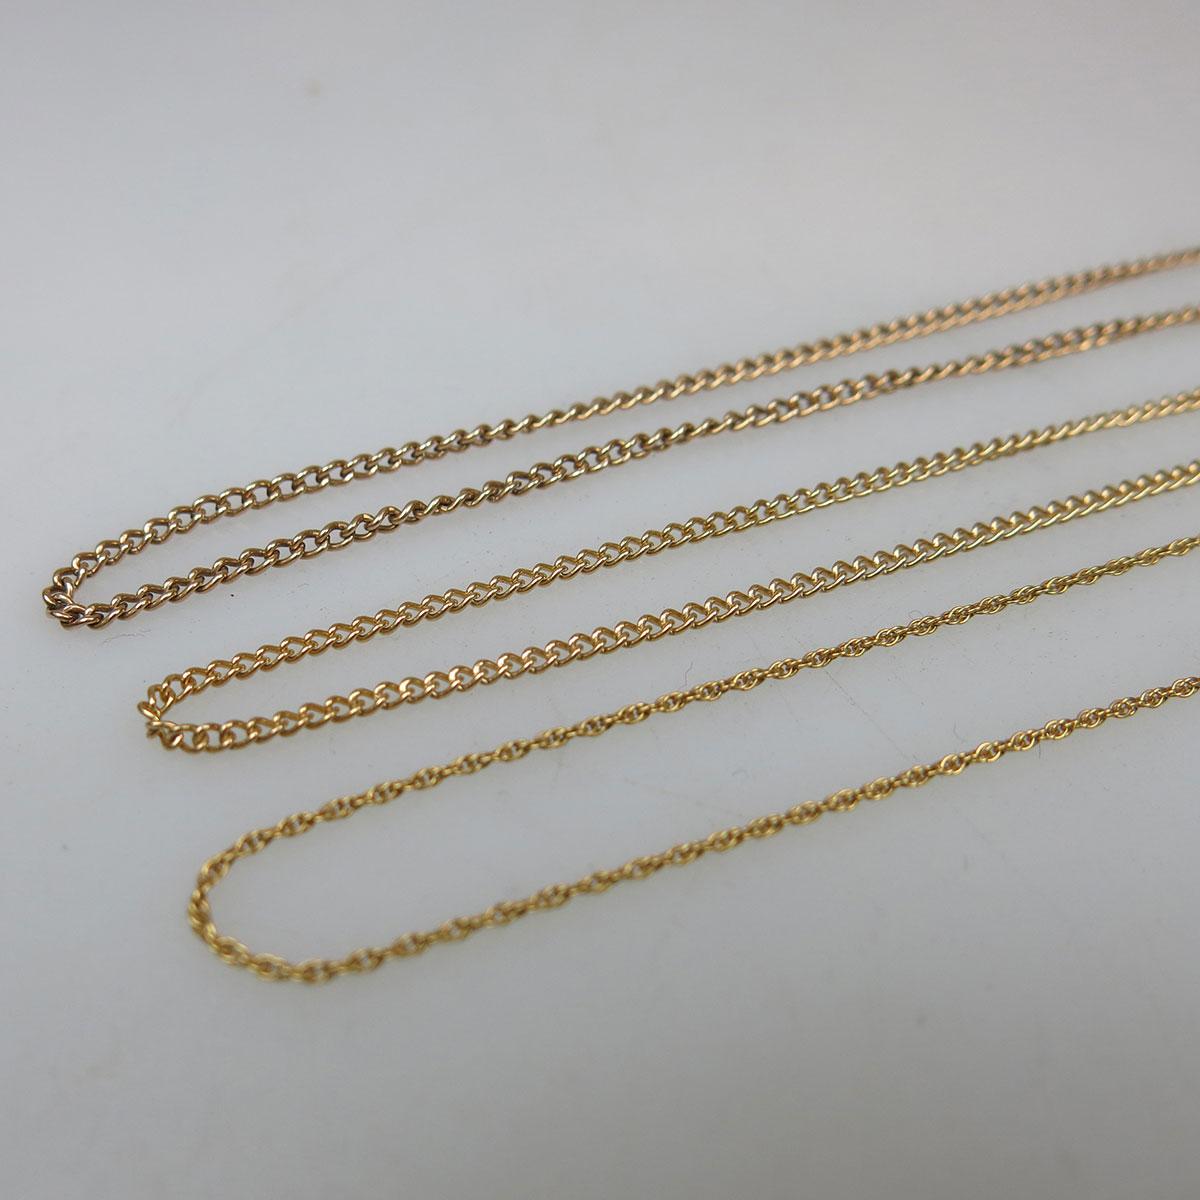 3 x 14k Yellow Gold Chains